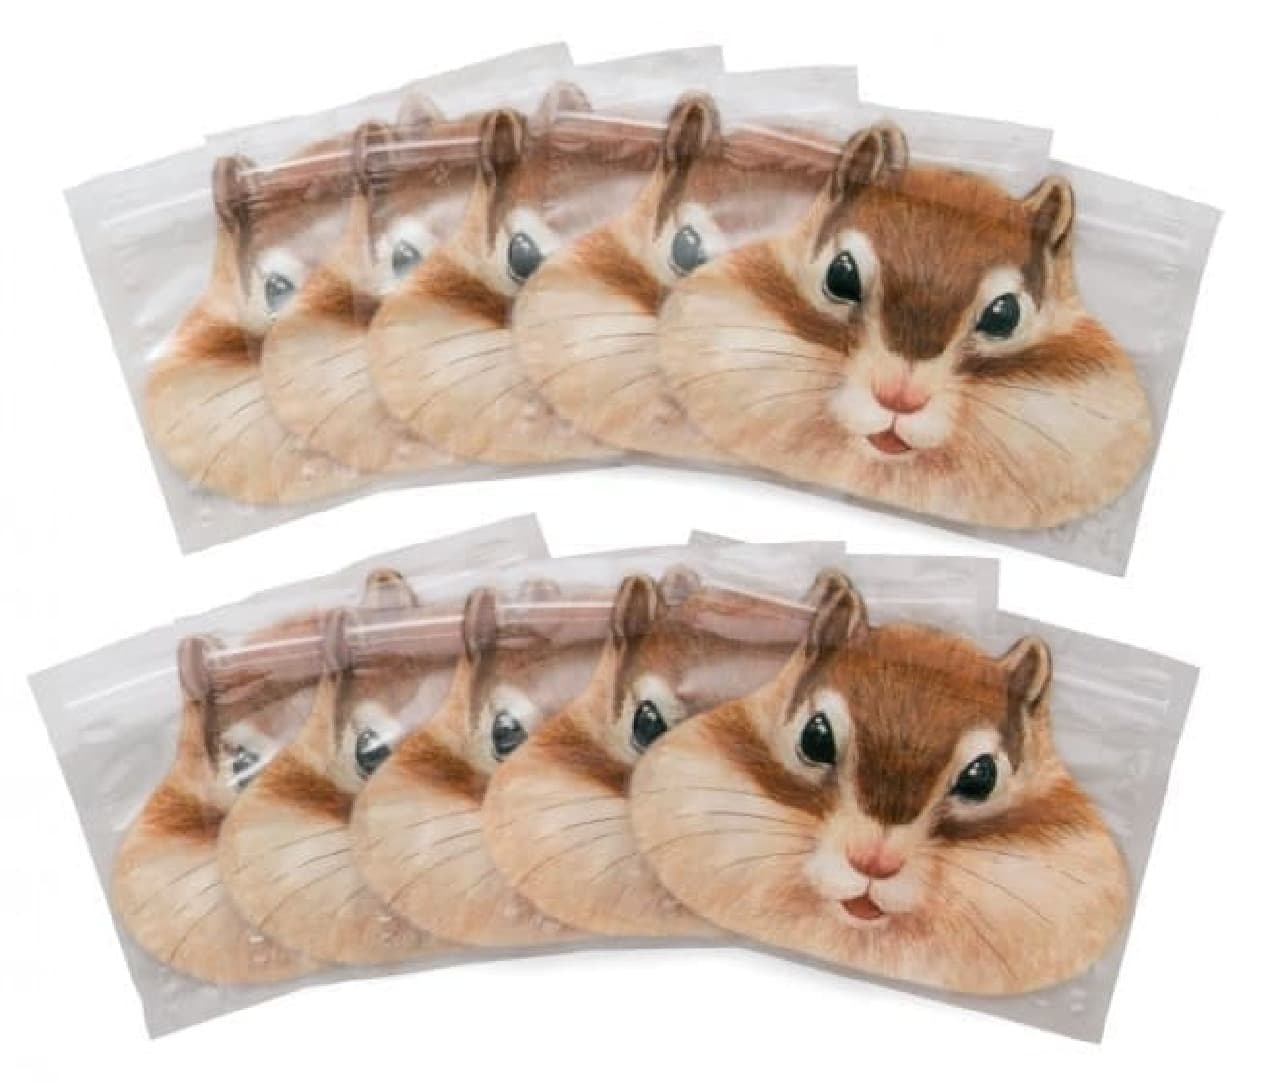 Chipmunk cheek pouch with gusset